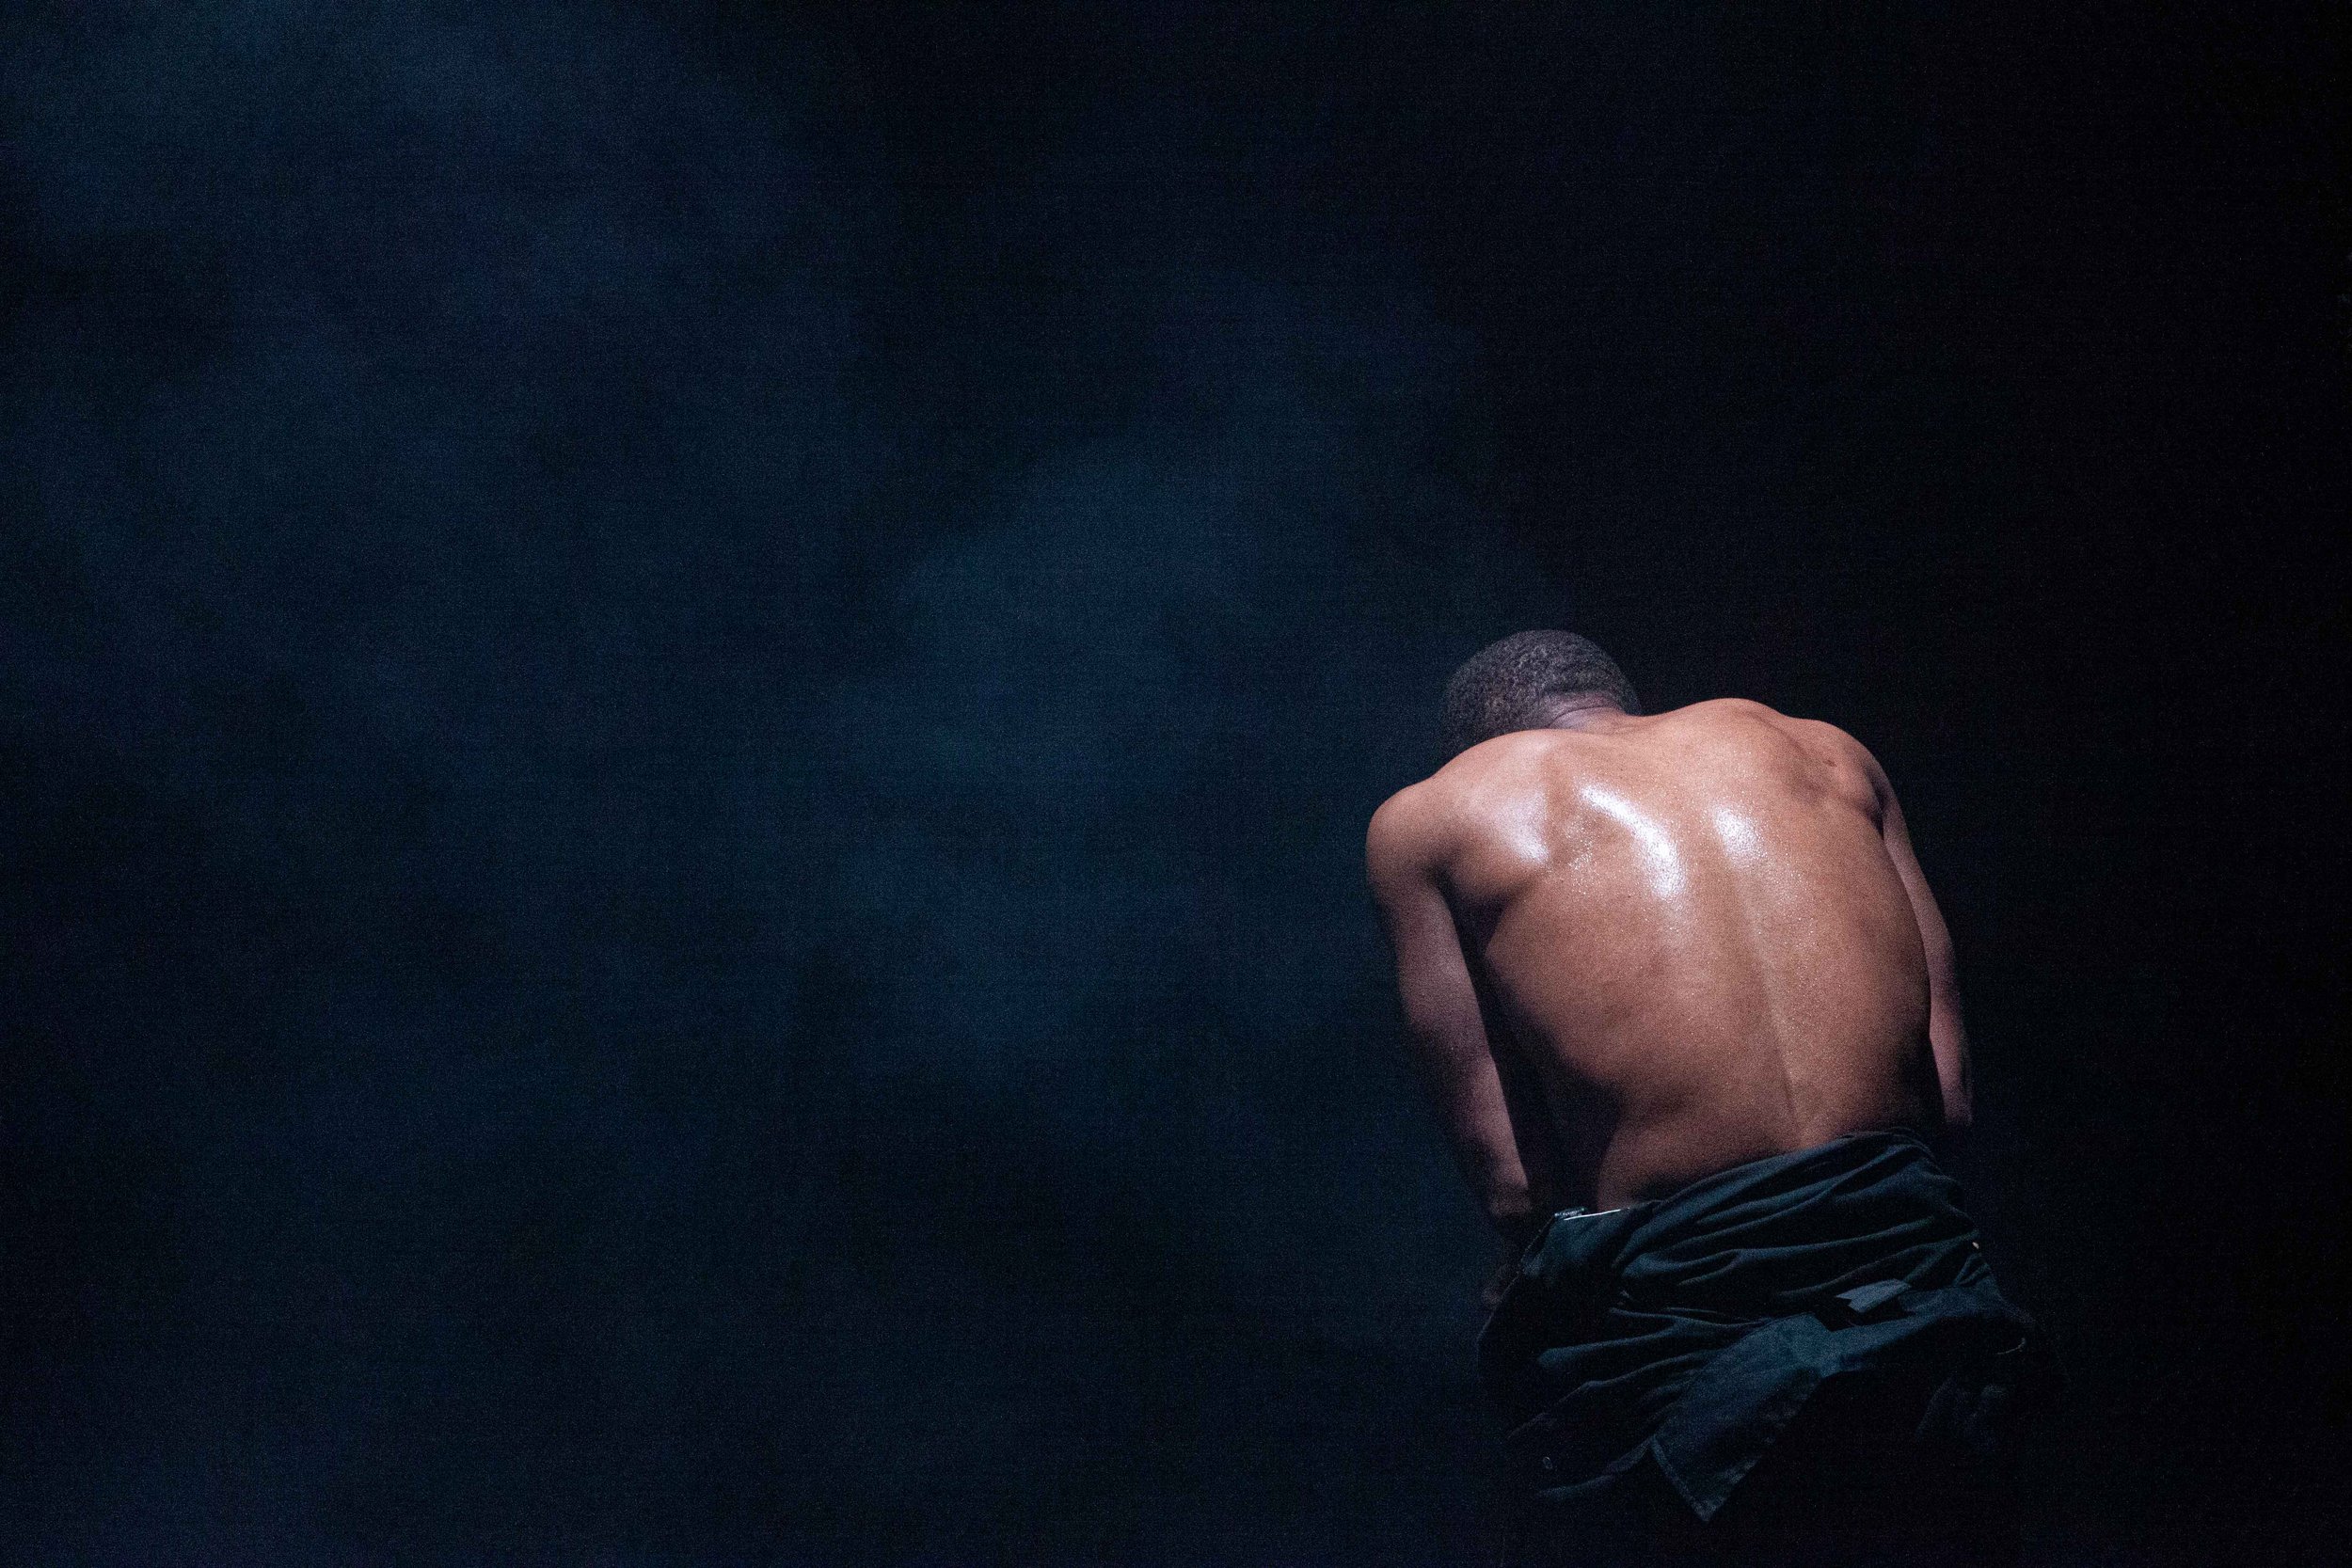  A shirtless man crouches in the corner of the dark image, his back to the viewer 